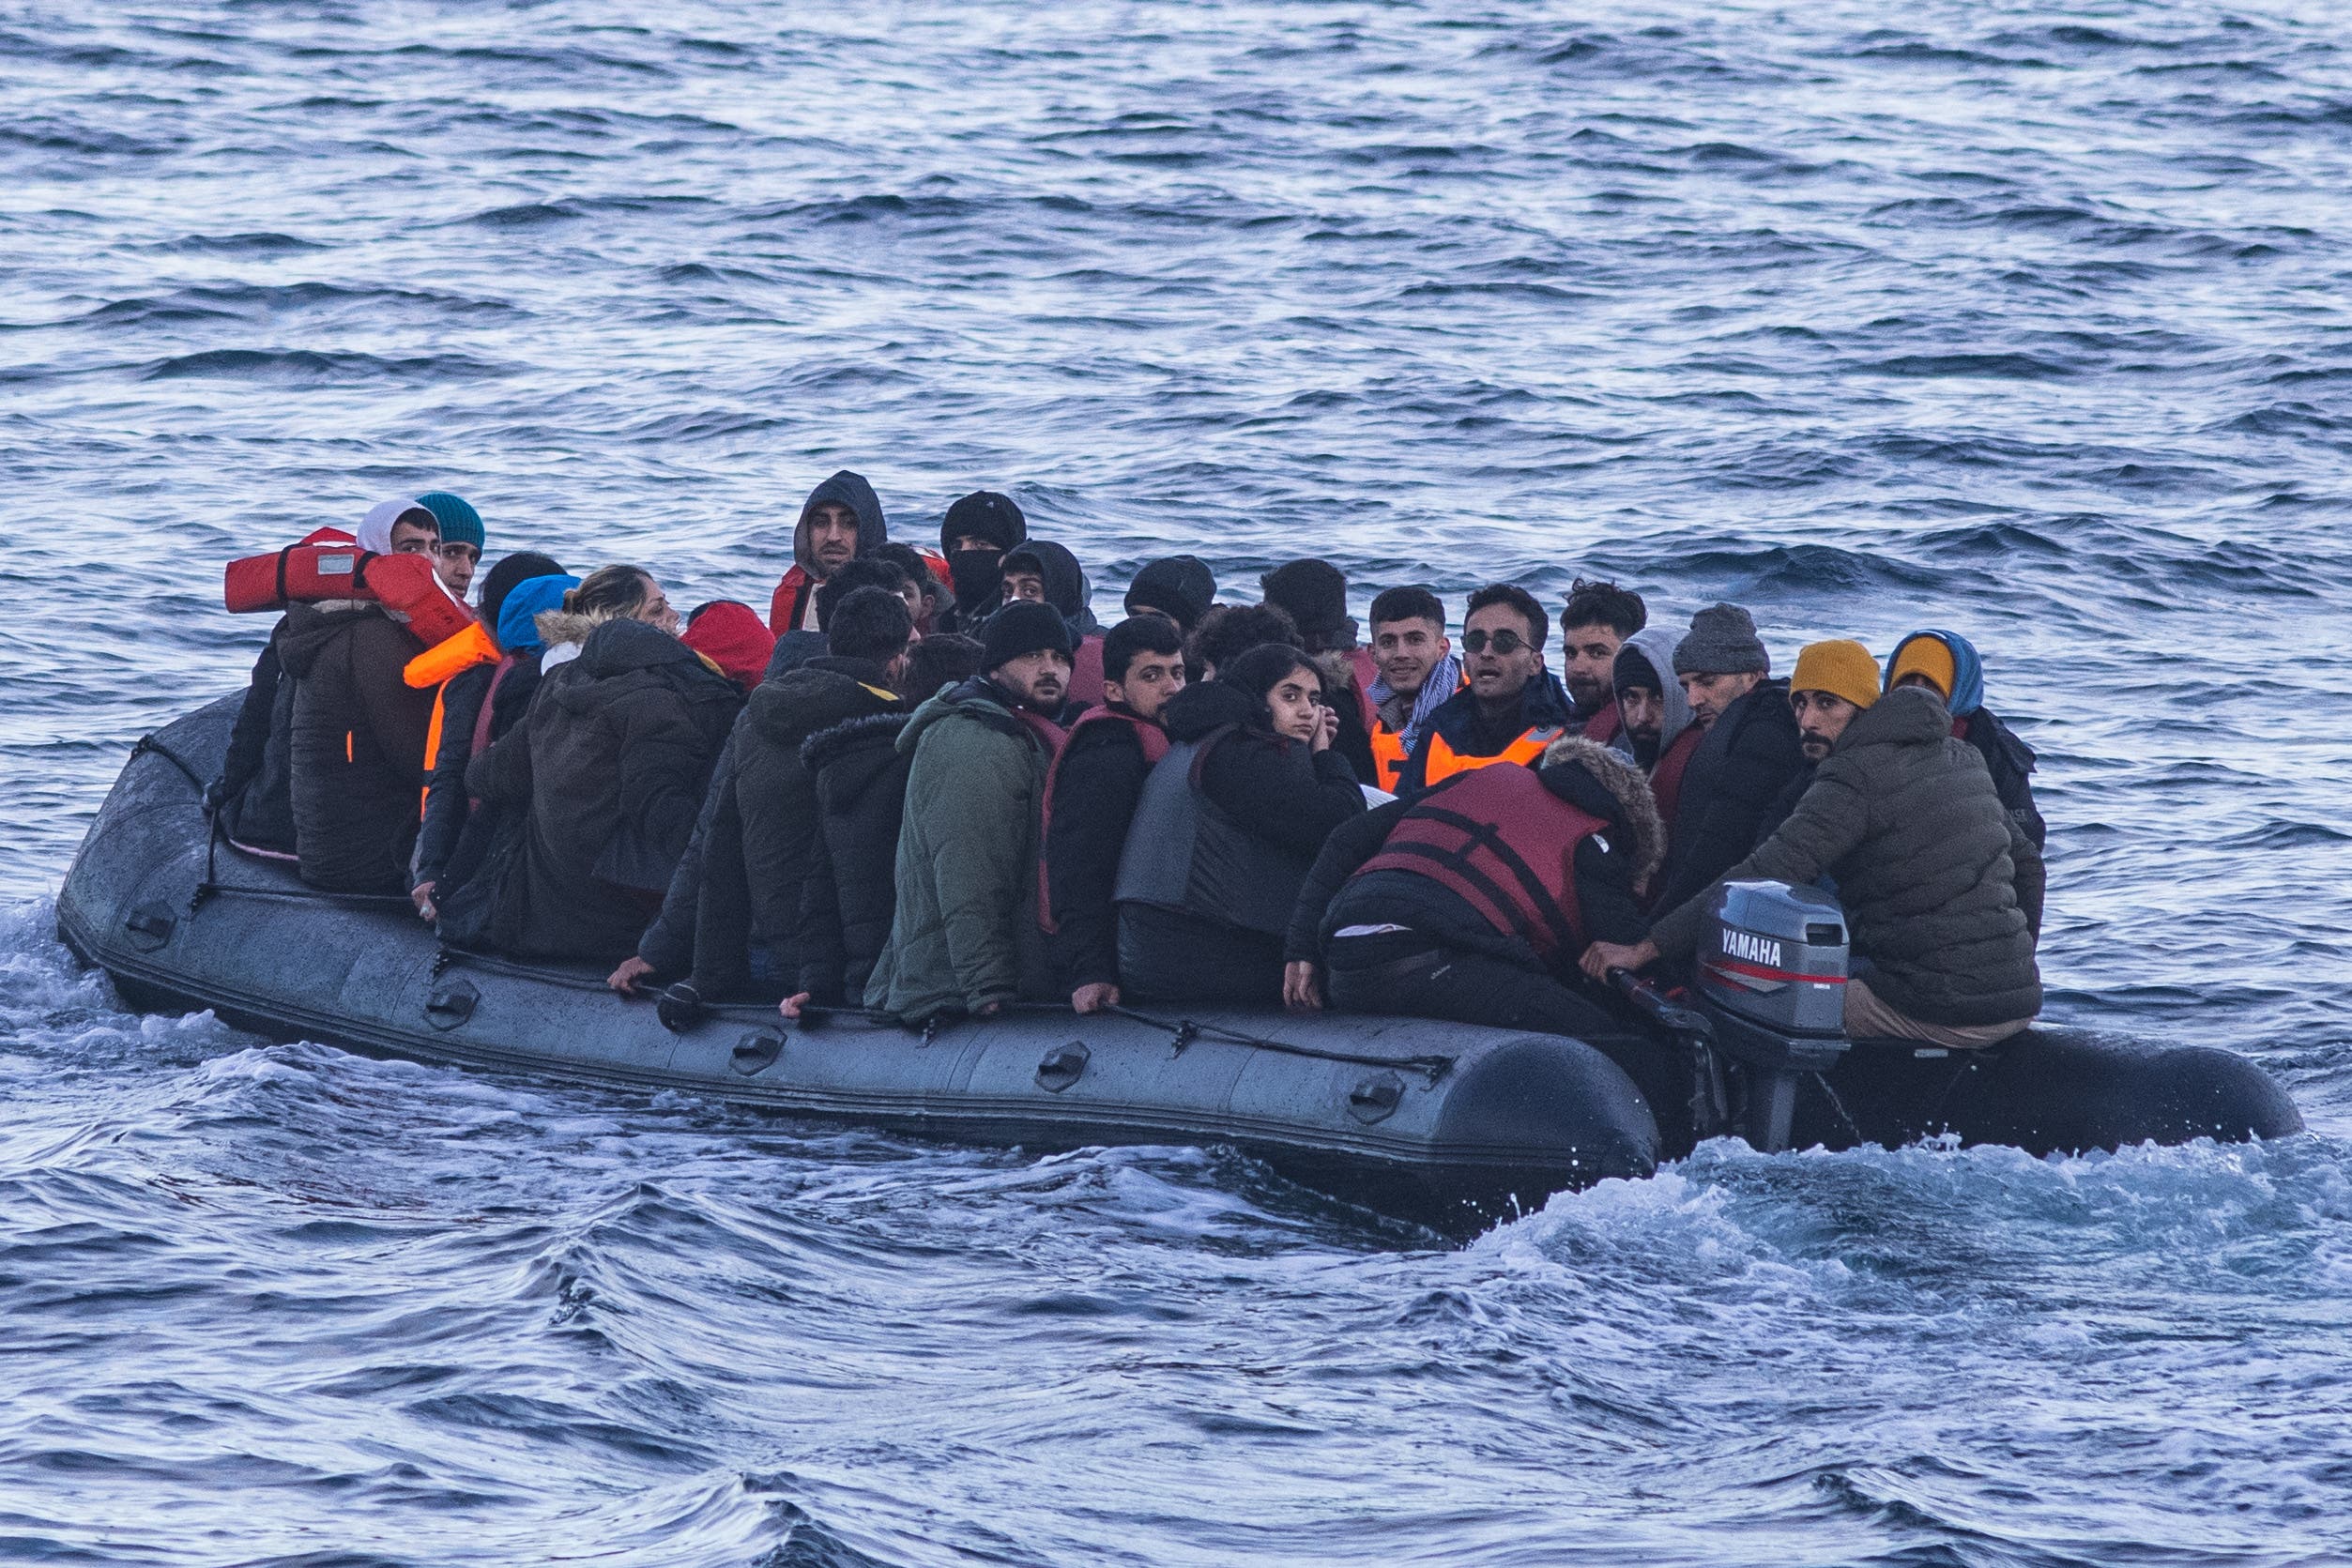 Migrants cross the English Channel in small boats last March